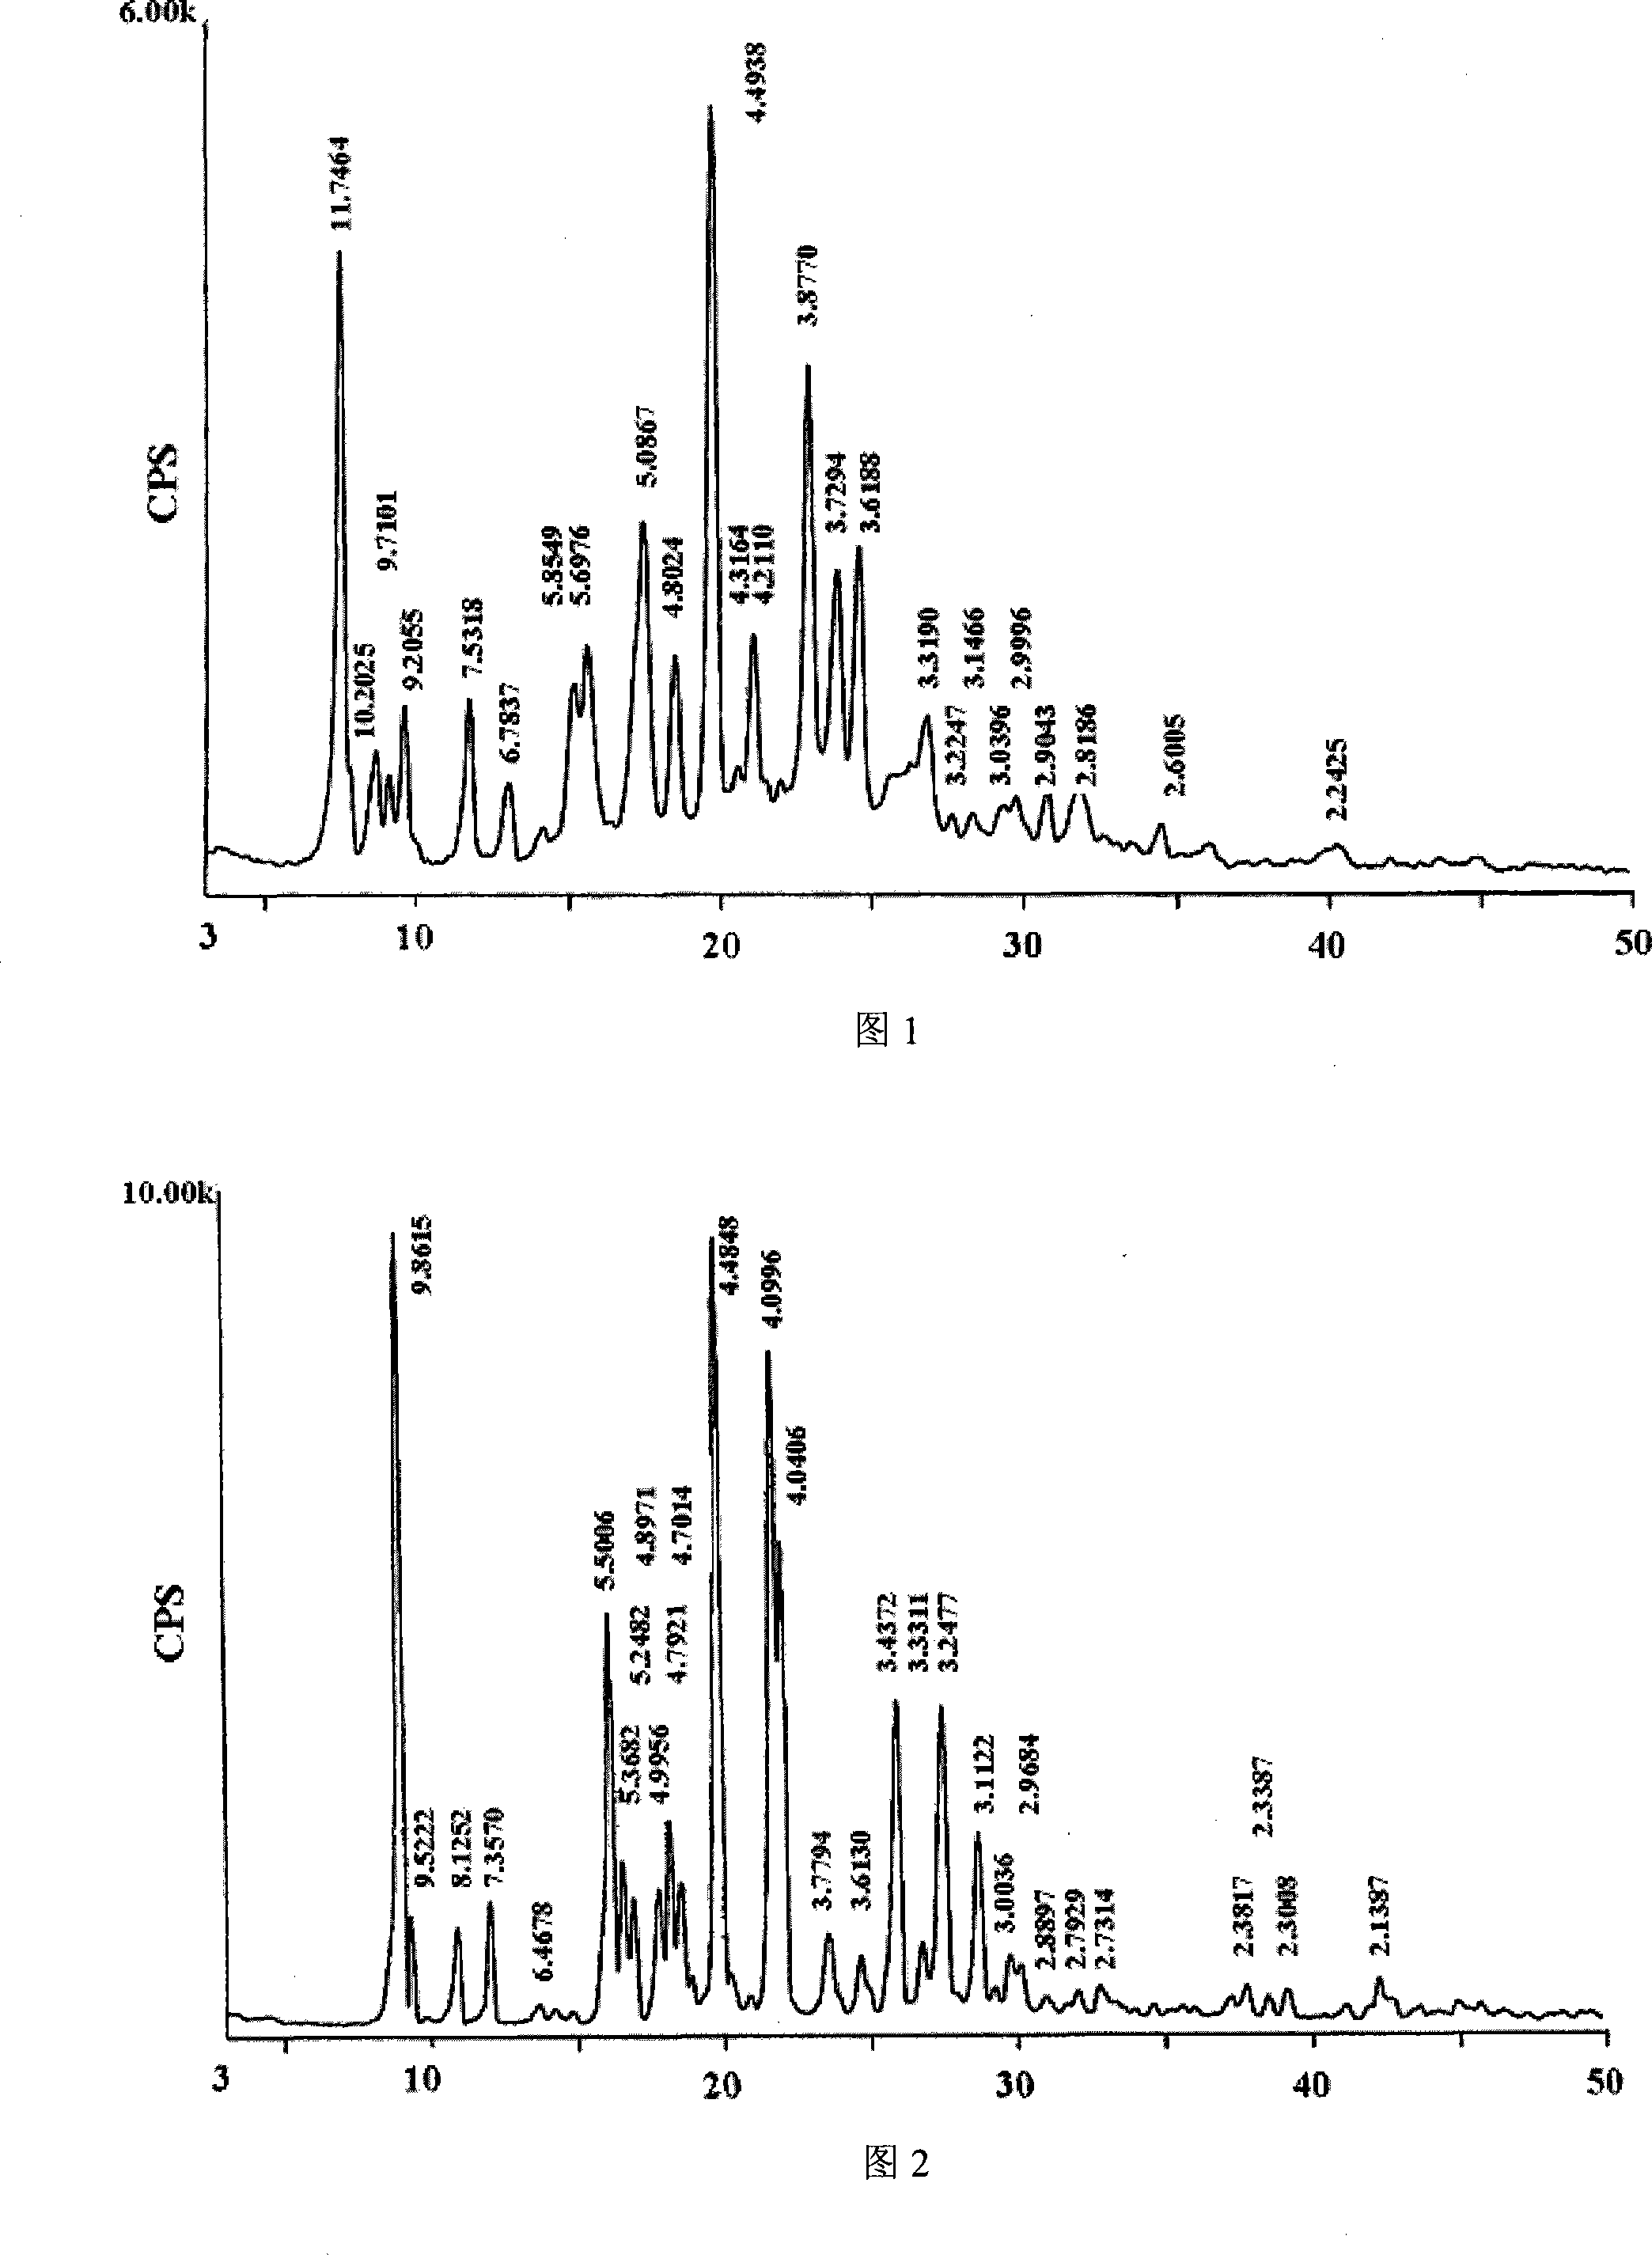 Cinepazide maleate crystal system and method for making same